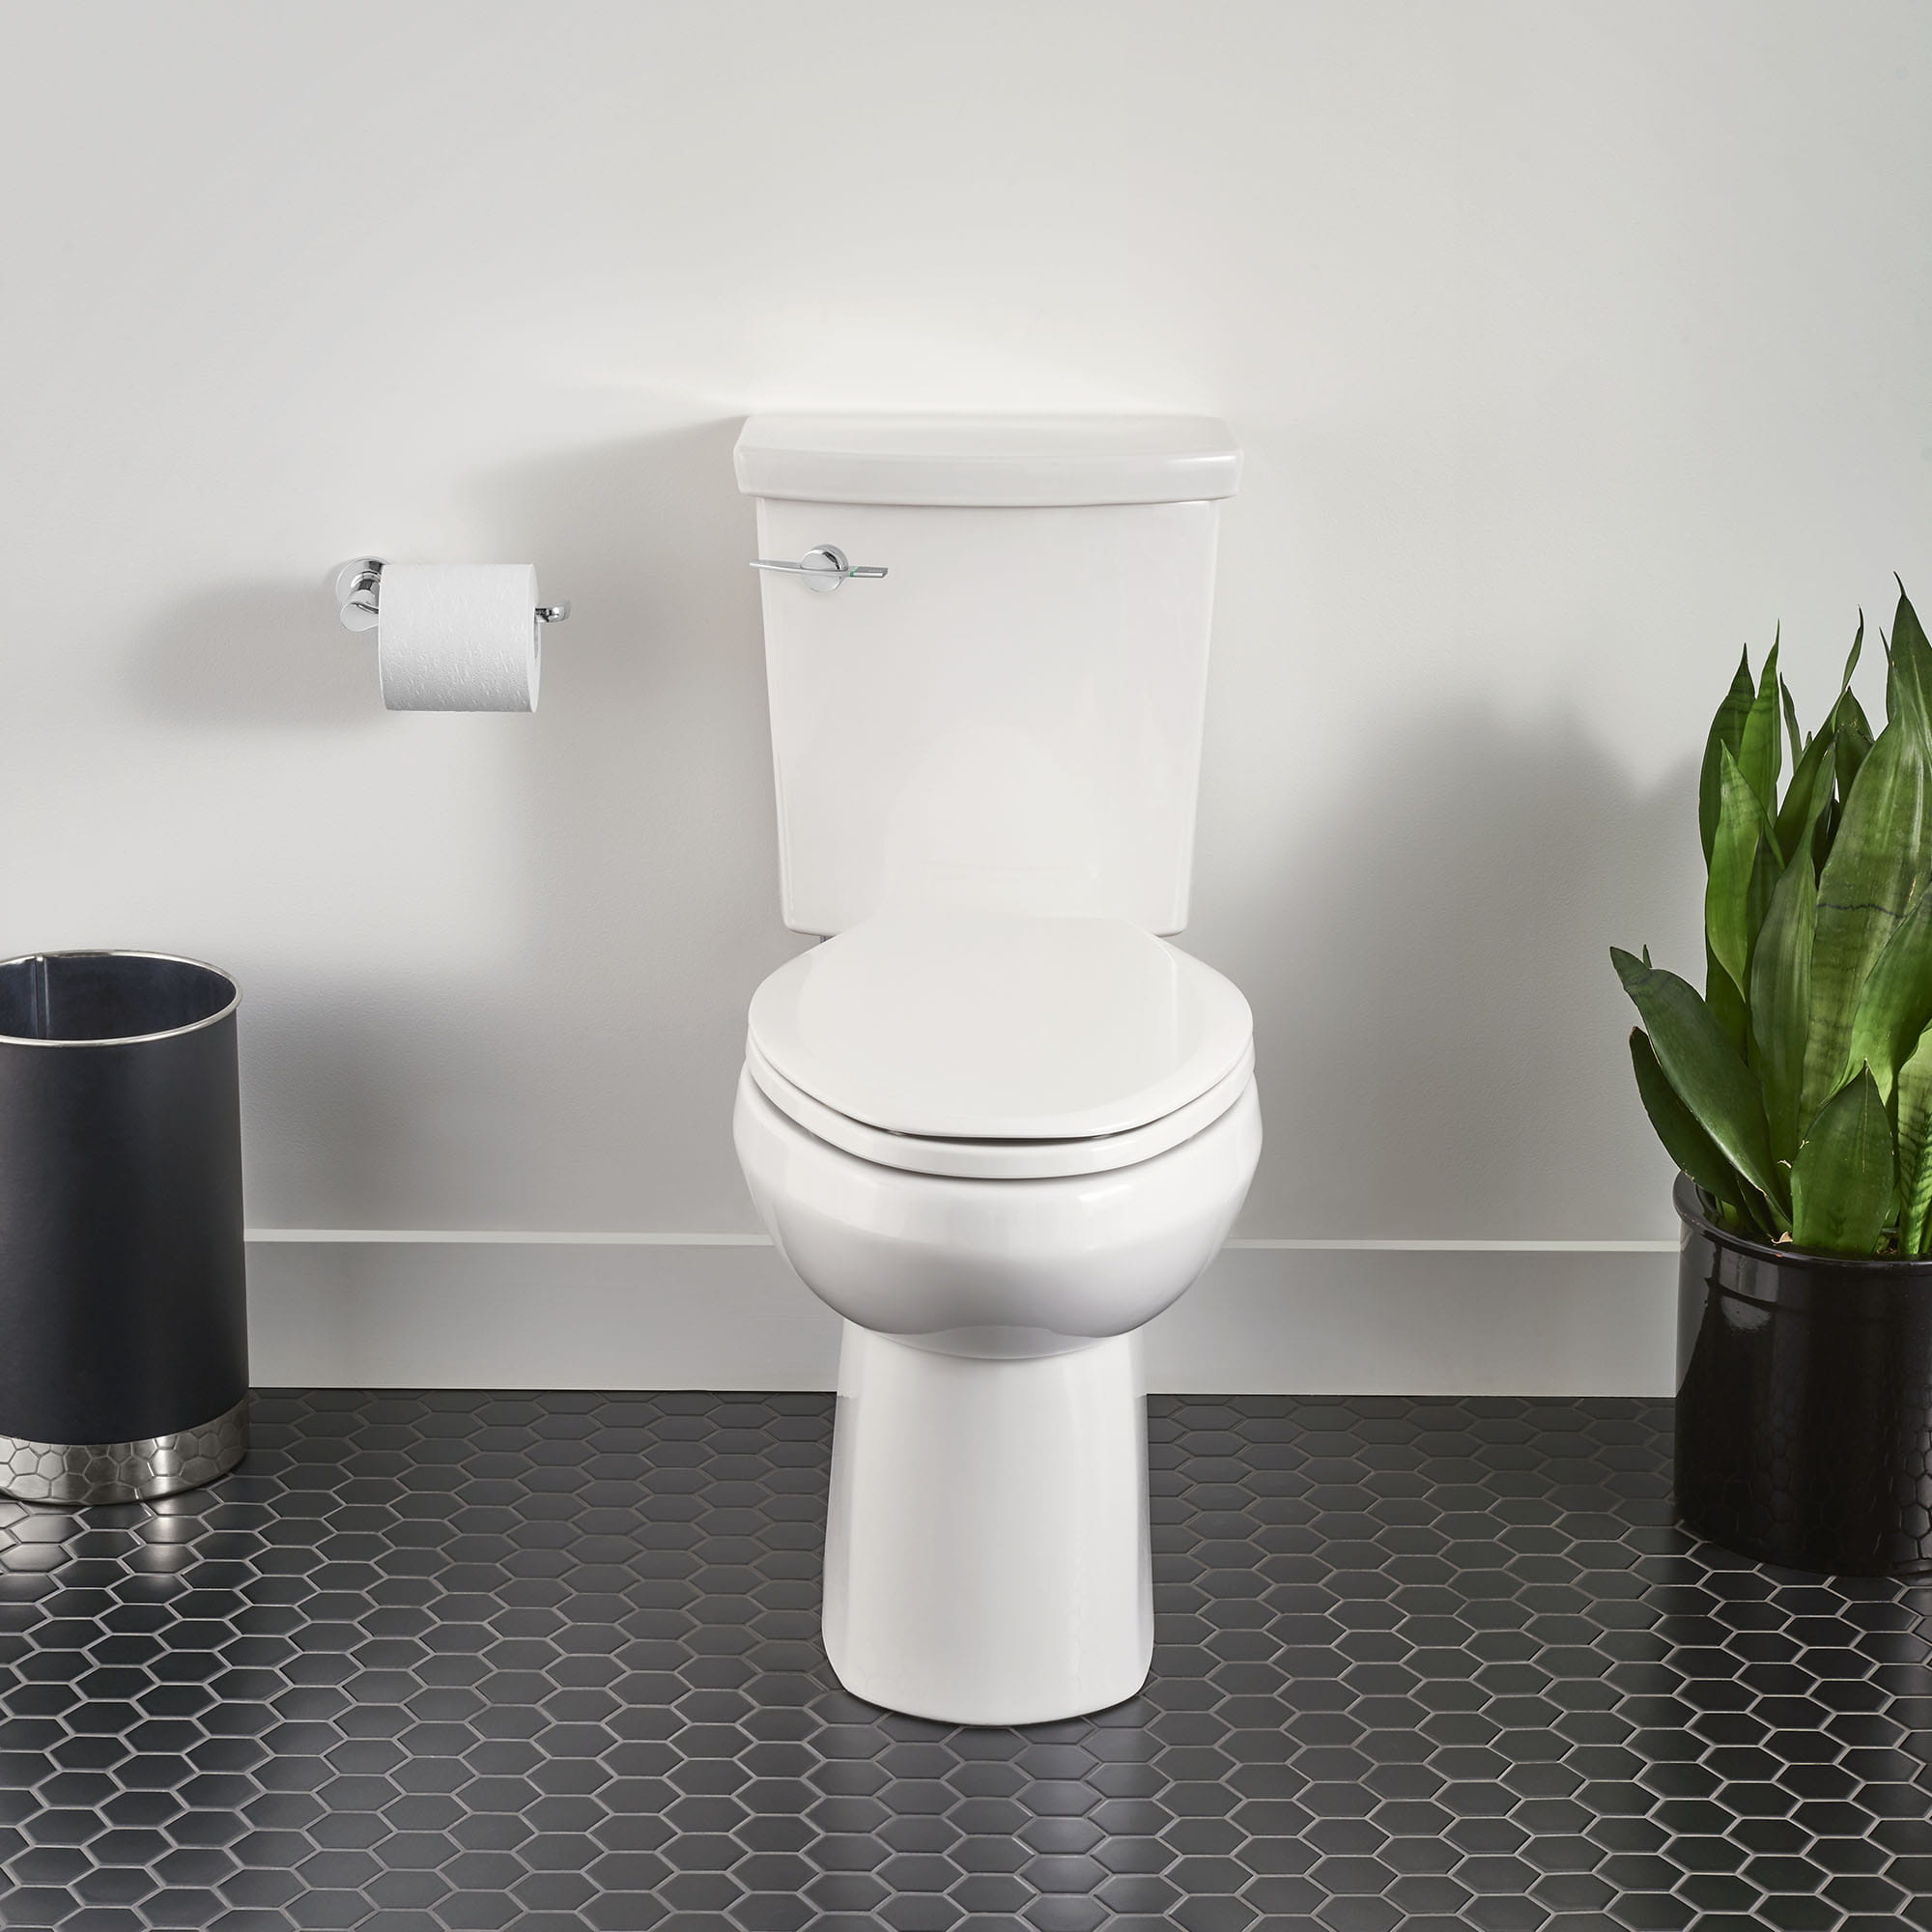 H2Option® ADA Two-Piece Dual Flush 1.28 gpf/4.8 Lpf and 0.92 gpf/3.5 Lpf Chair Height Elongated Toilet Less Seat